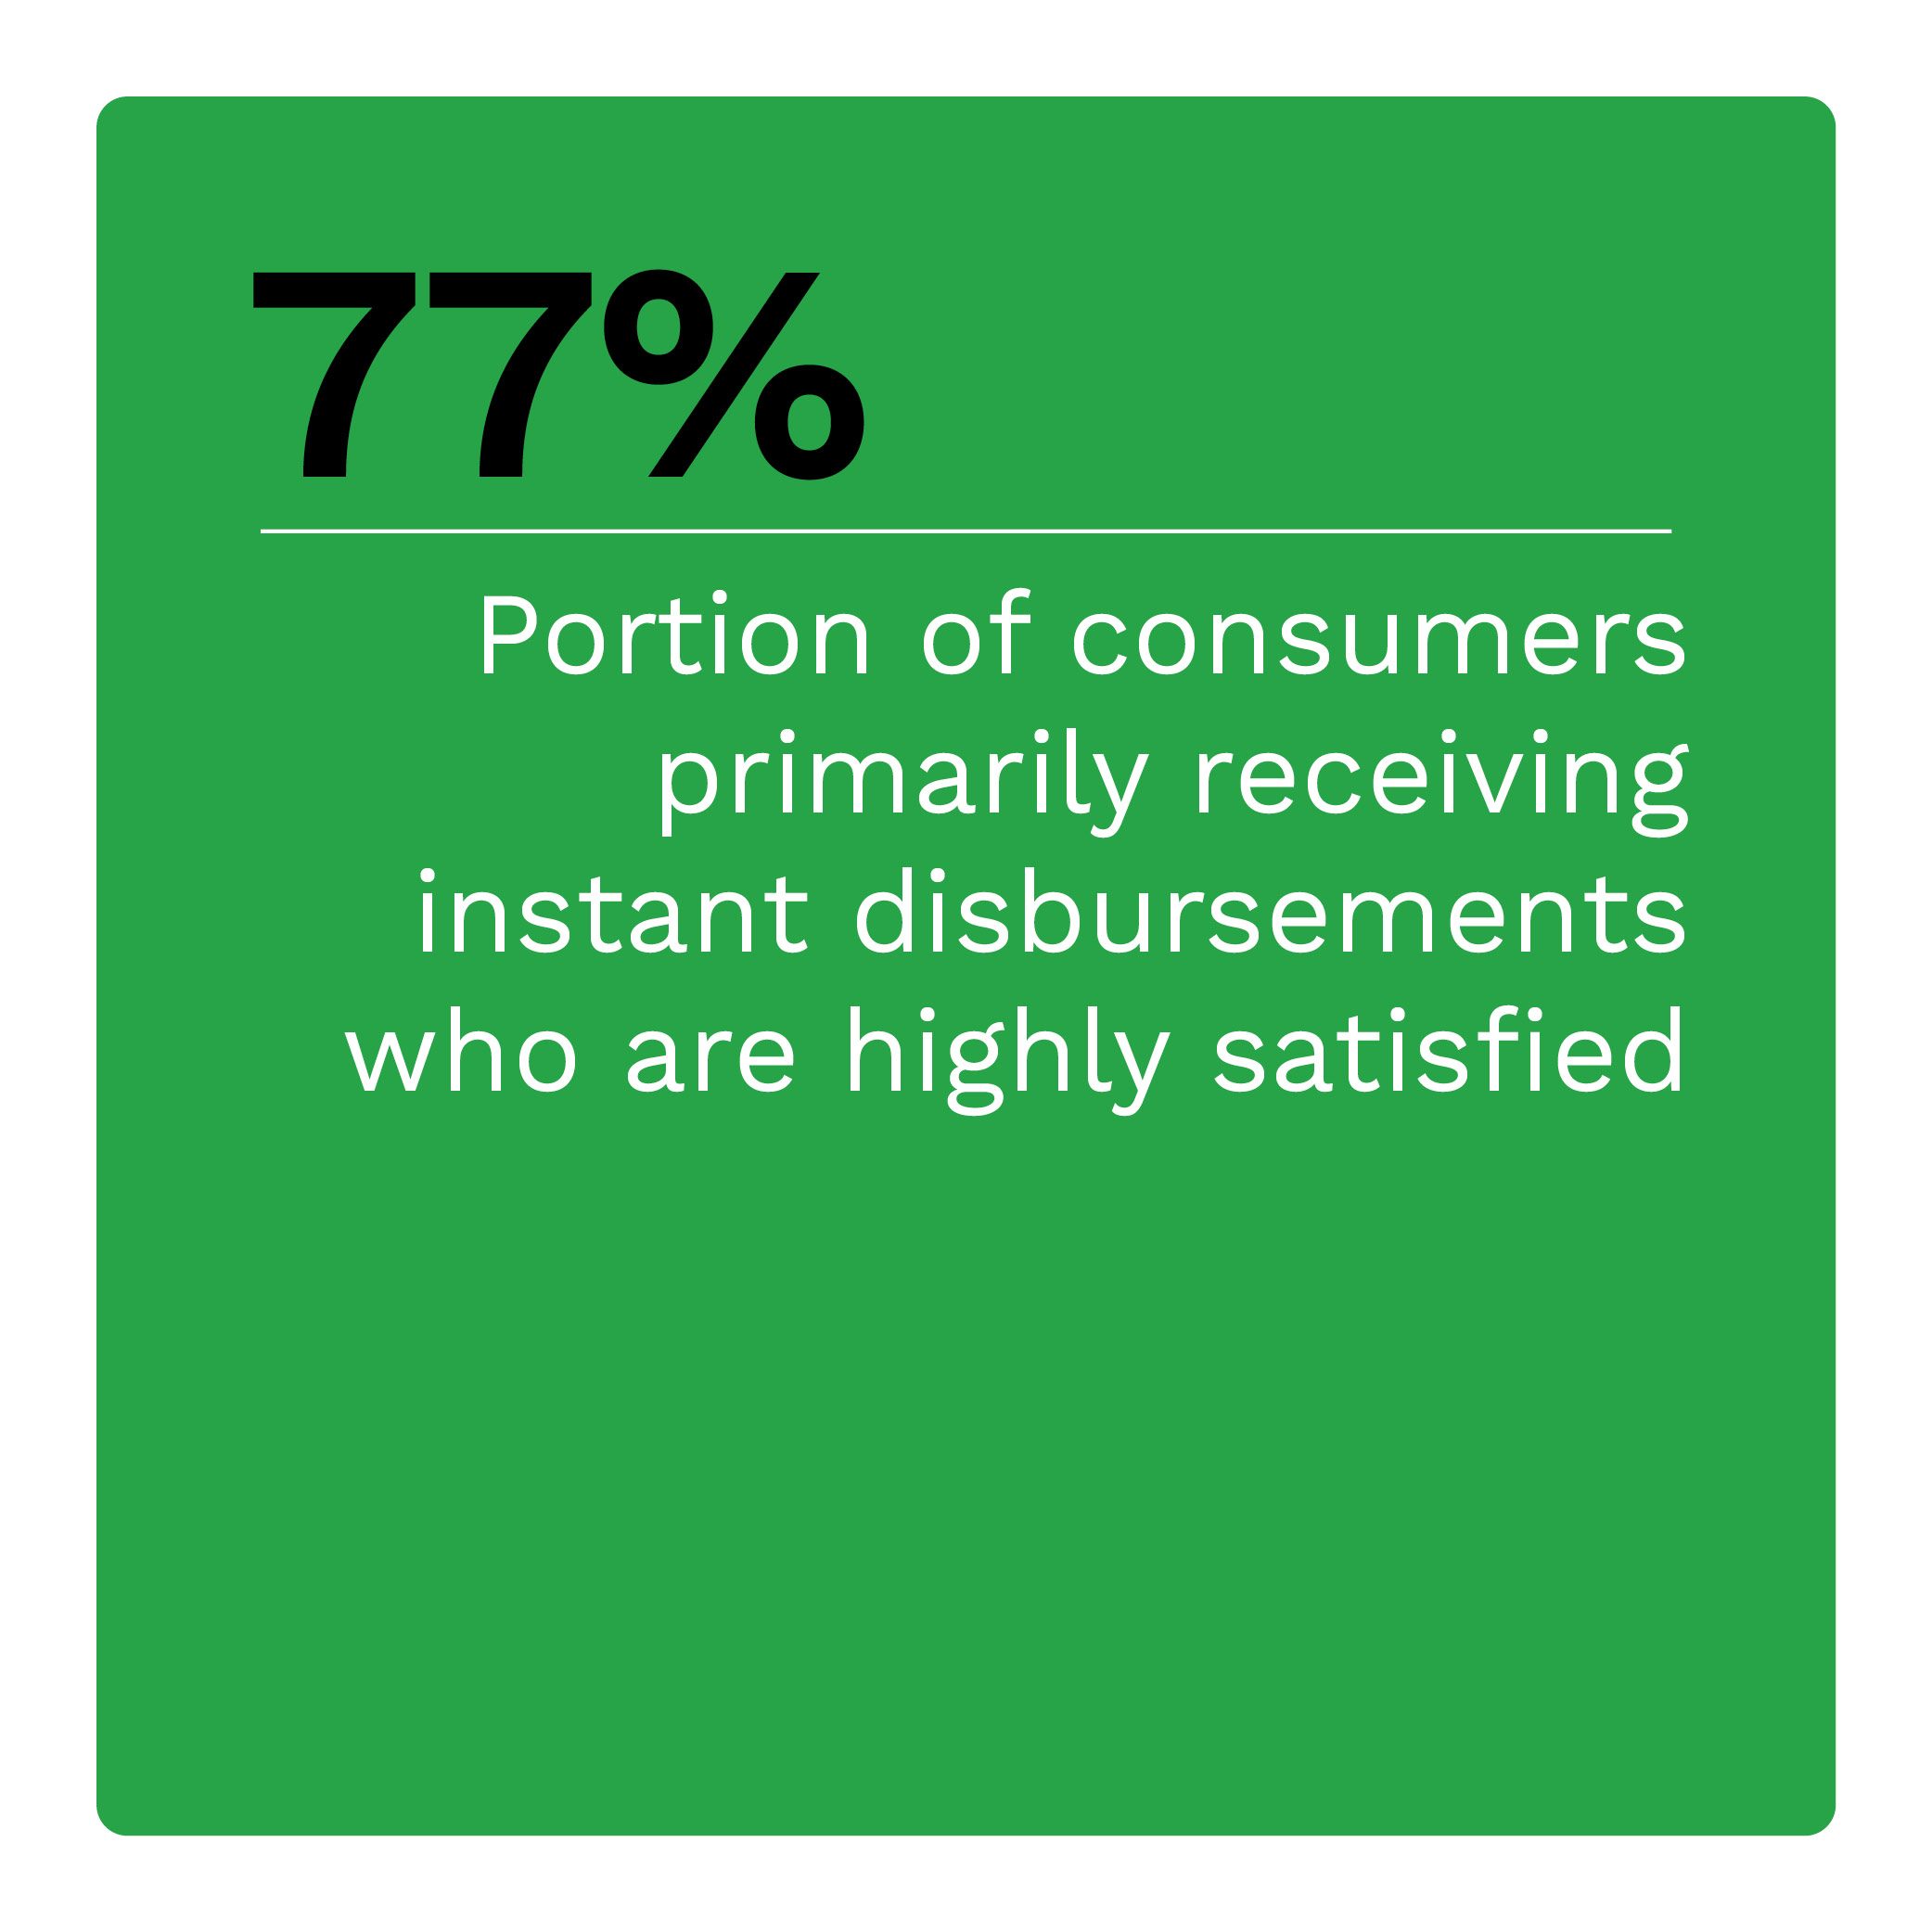 77%: Portion of consumers primarily receiving instant disbursements who are highly satisfied